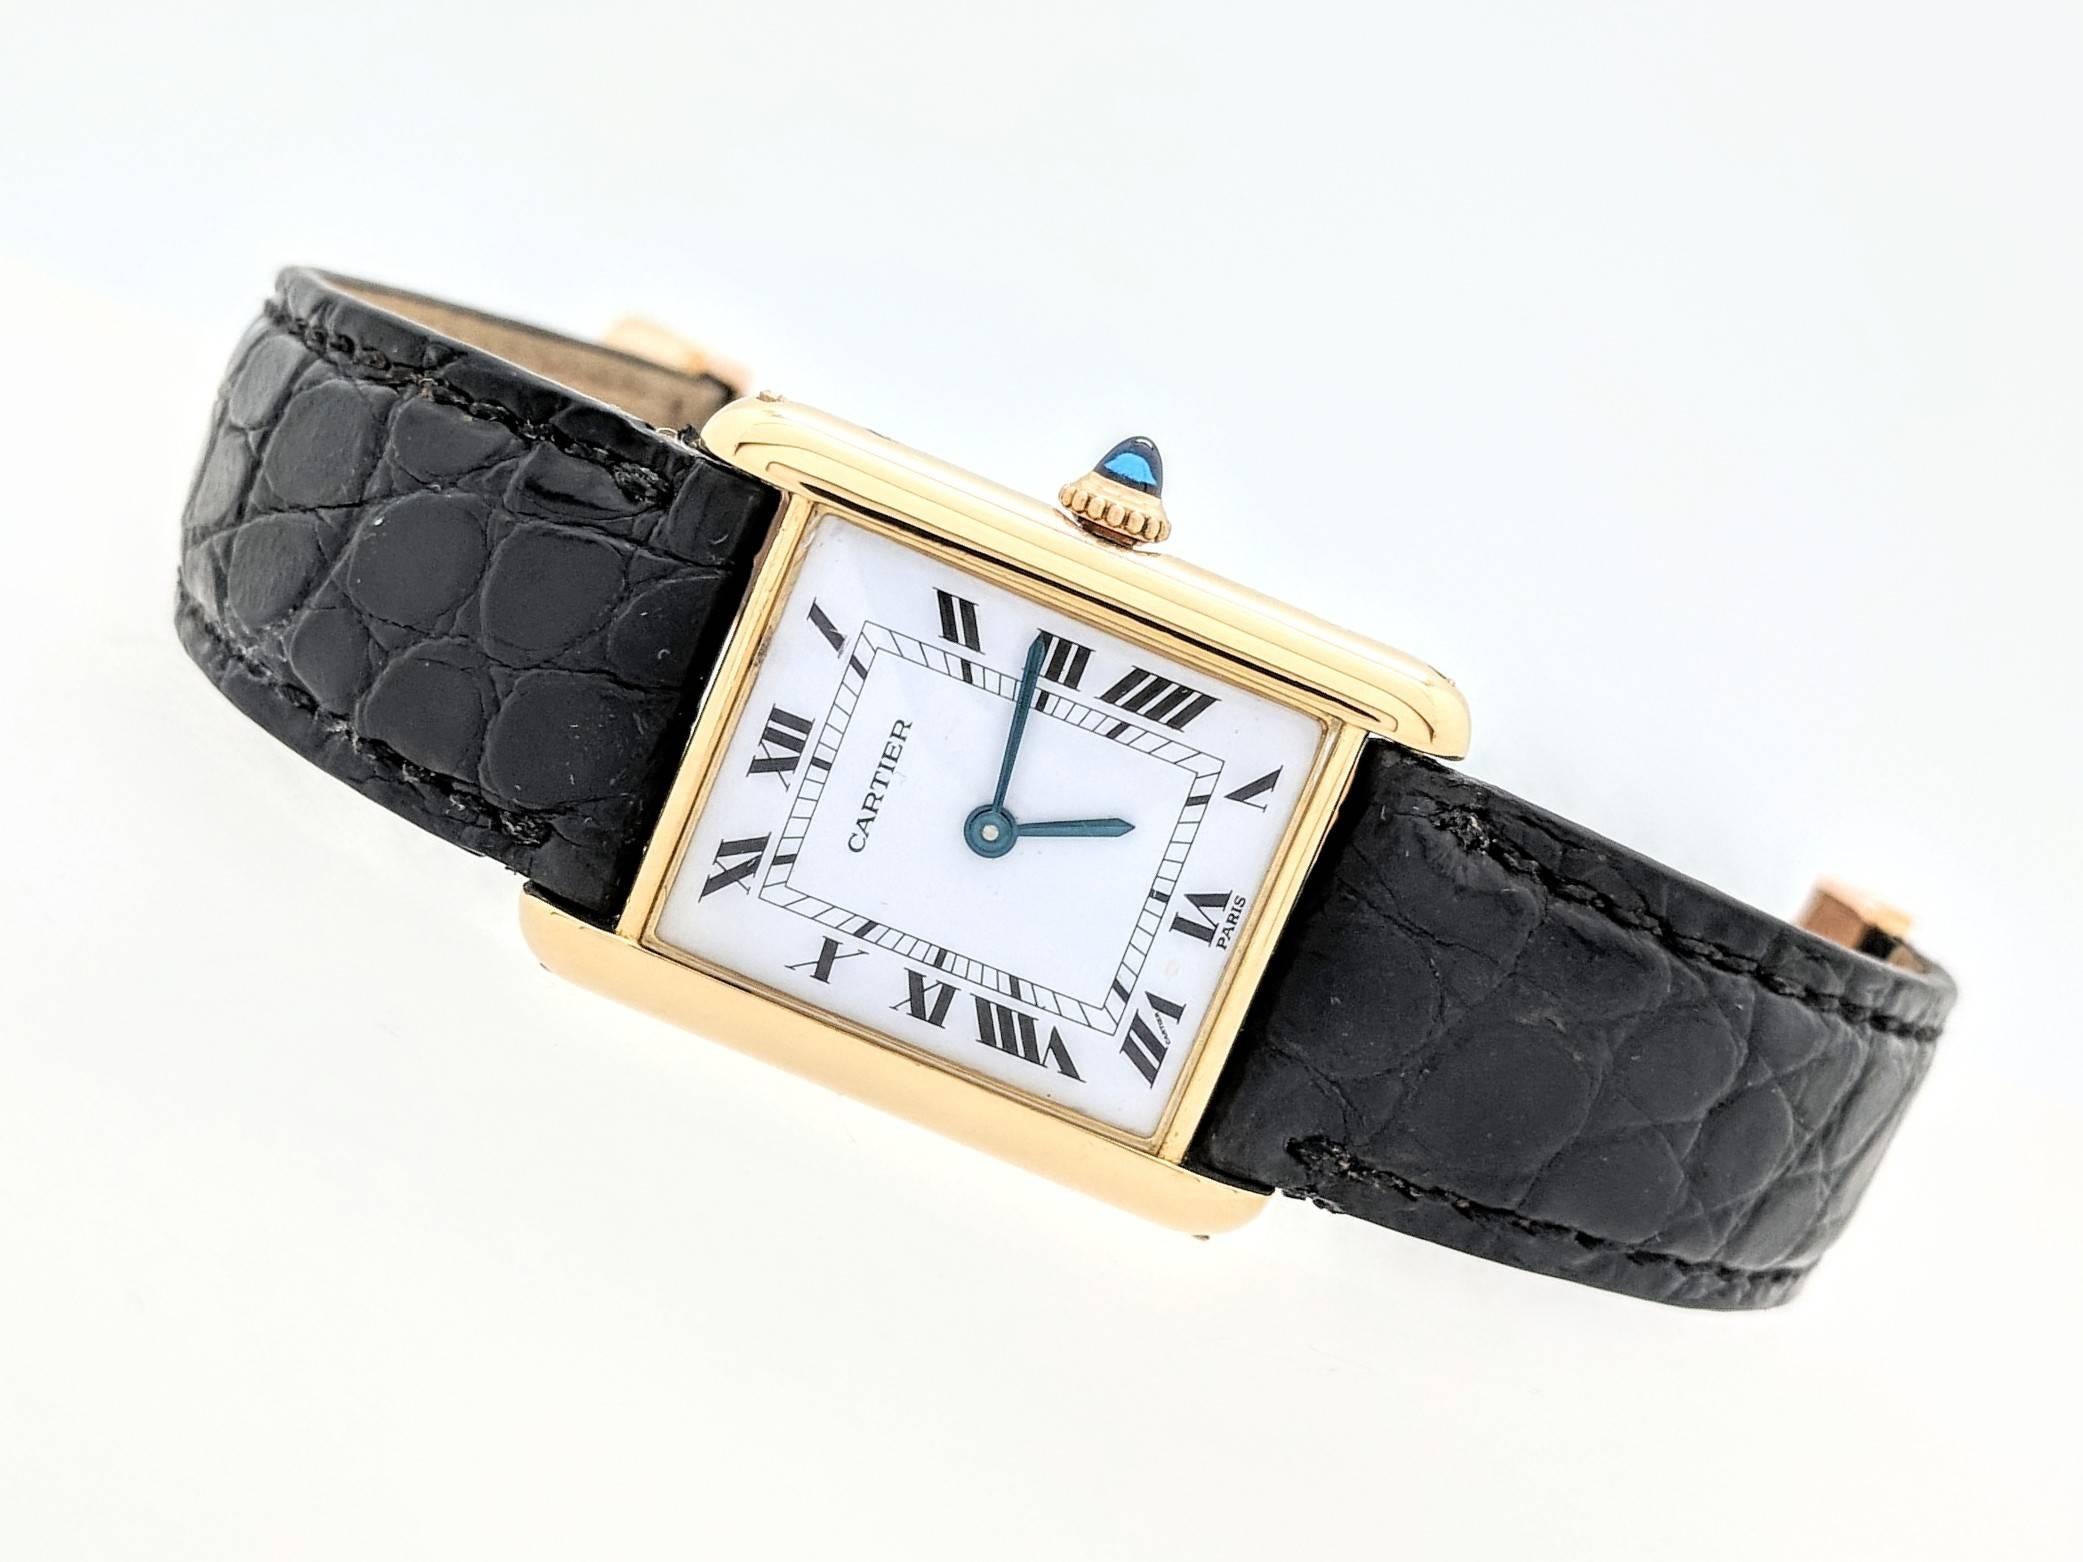 Vintage 1970s Cartier Tank Louis 18K Solid Gold Unisex Watch w/Deployment Clasp

You are viewing an Authentic Vintage 1970's Cartier Tank Louis 18k Yellow Gold Watch with Deployment Clasp.

Unisex 18k yellow gold 23x30mm Cartier Tank Louis manual